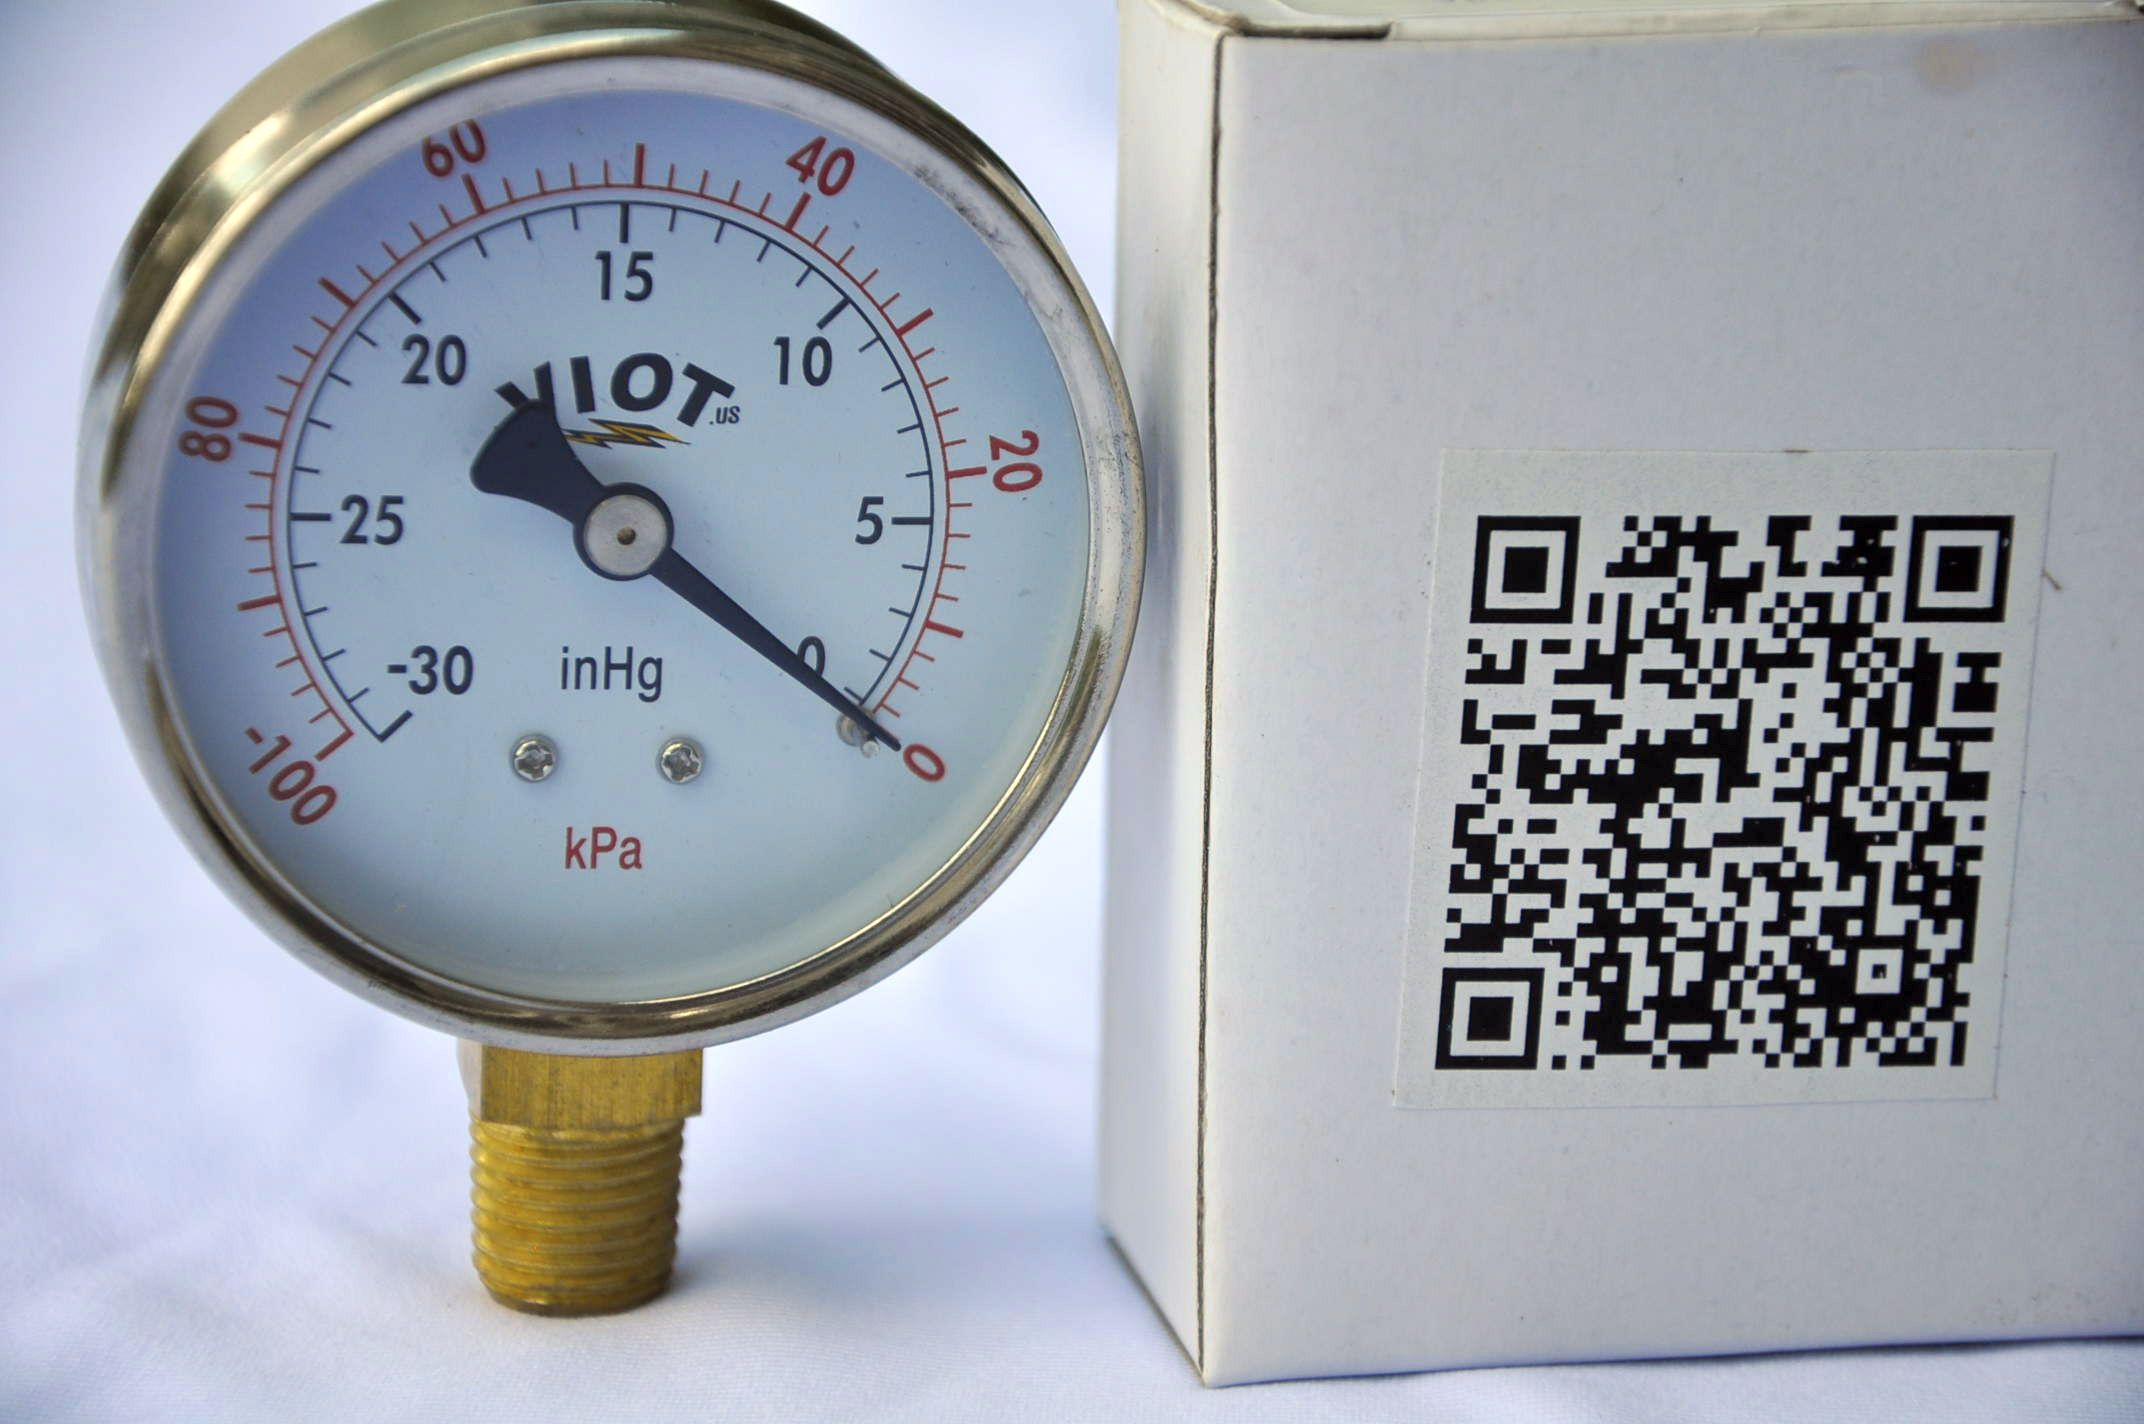 Analog Vacuum Gauge, from 0 to -30 inch Hg/0 to -100 kPa, 2 inch face SS case 1/4 NTP male connector on lower side